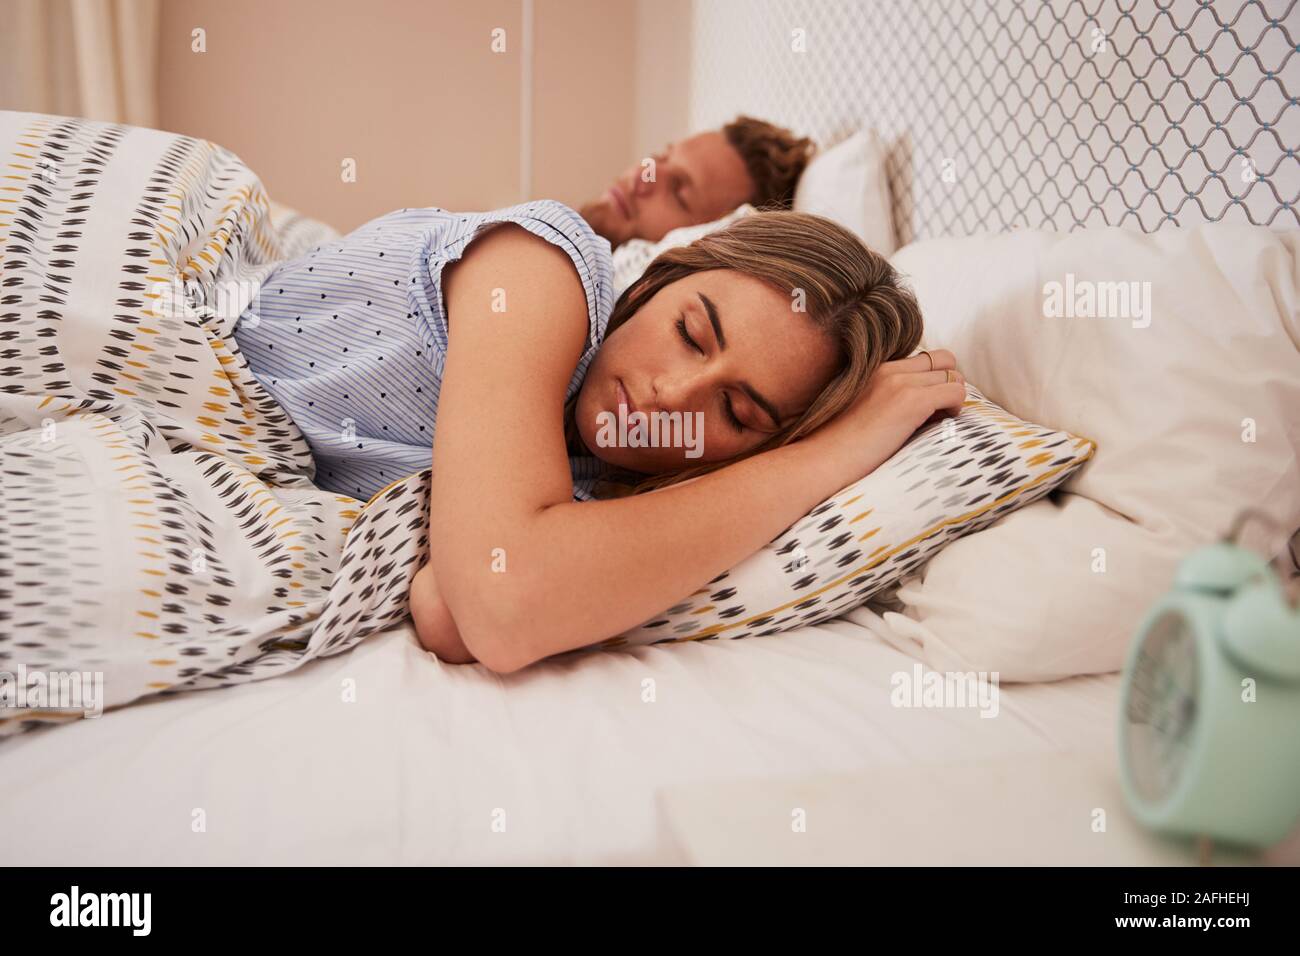 Millennial white couple asleep in bed, alarm clock in the foreground, close up Stock Photo